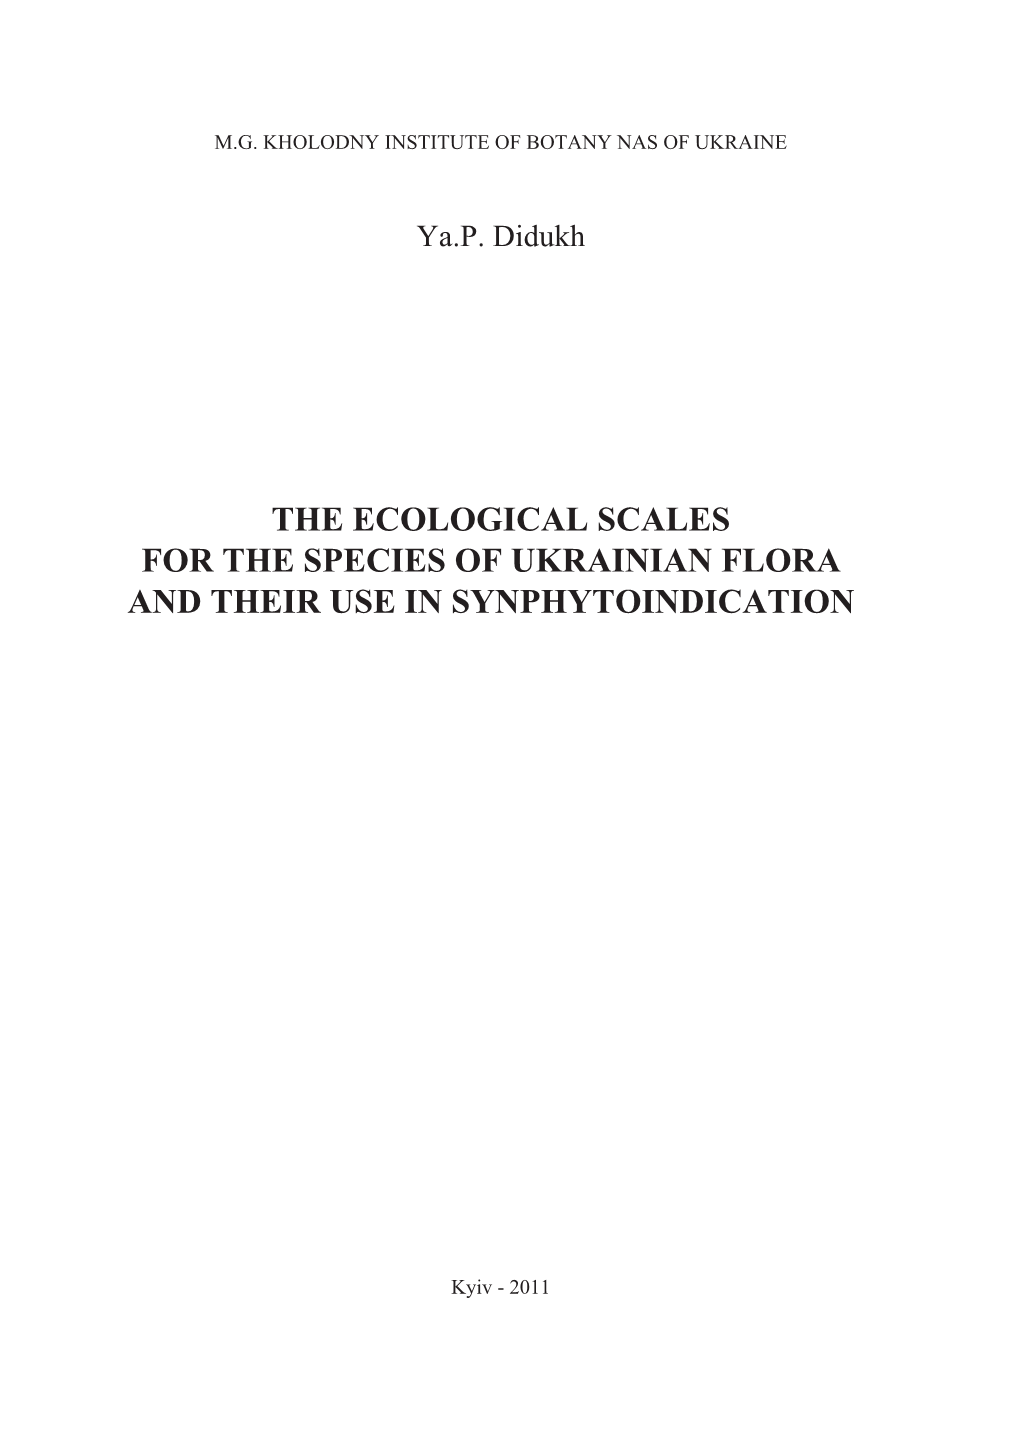 The Ecological Scales for the Species of Ukrainian Flora and Their Use in Synphytoindication